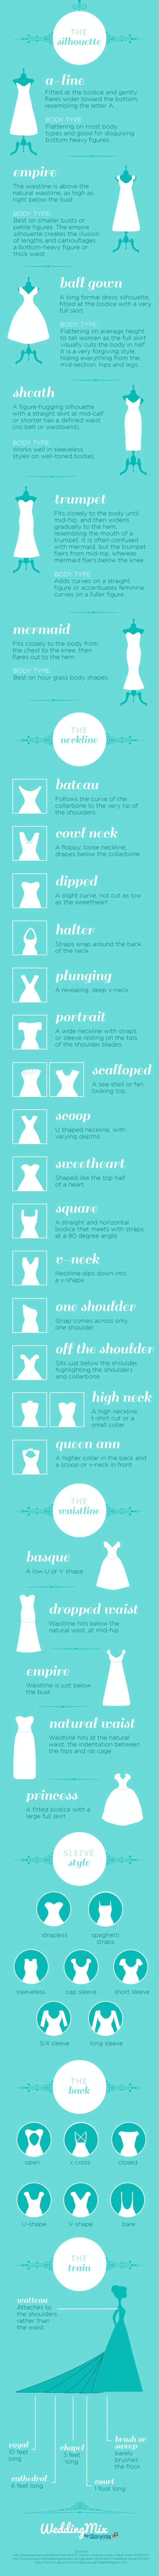 Bridal gown infographic. Do your research before you shop!